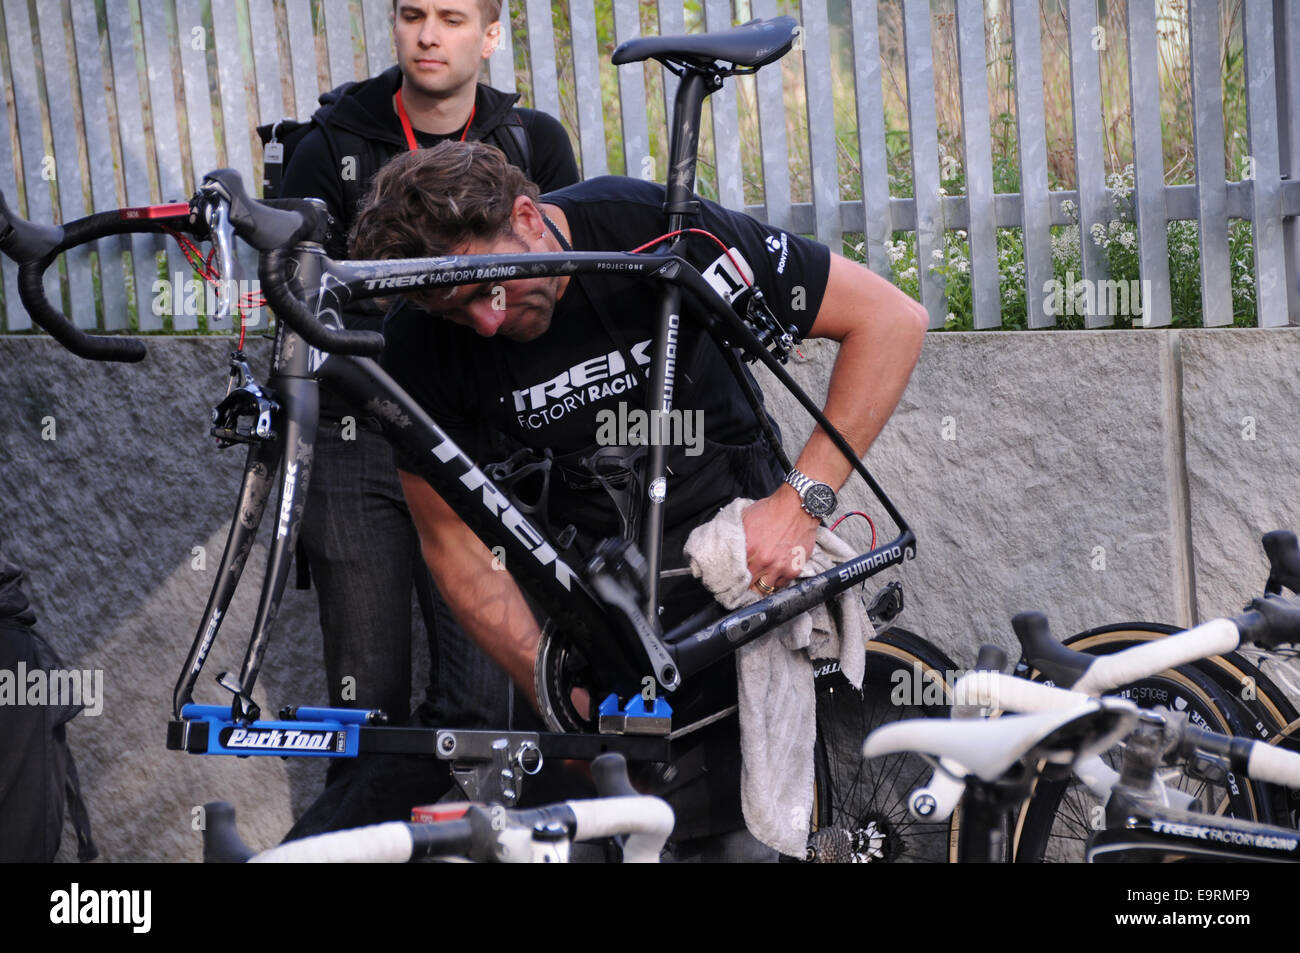 Fabian Cancellaras bike get some tender lover and care from team Trek bike mechanic after the 2014 Paris Roubaix cycle race Stock Photo